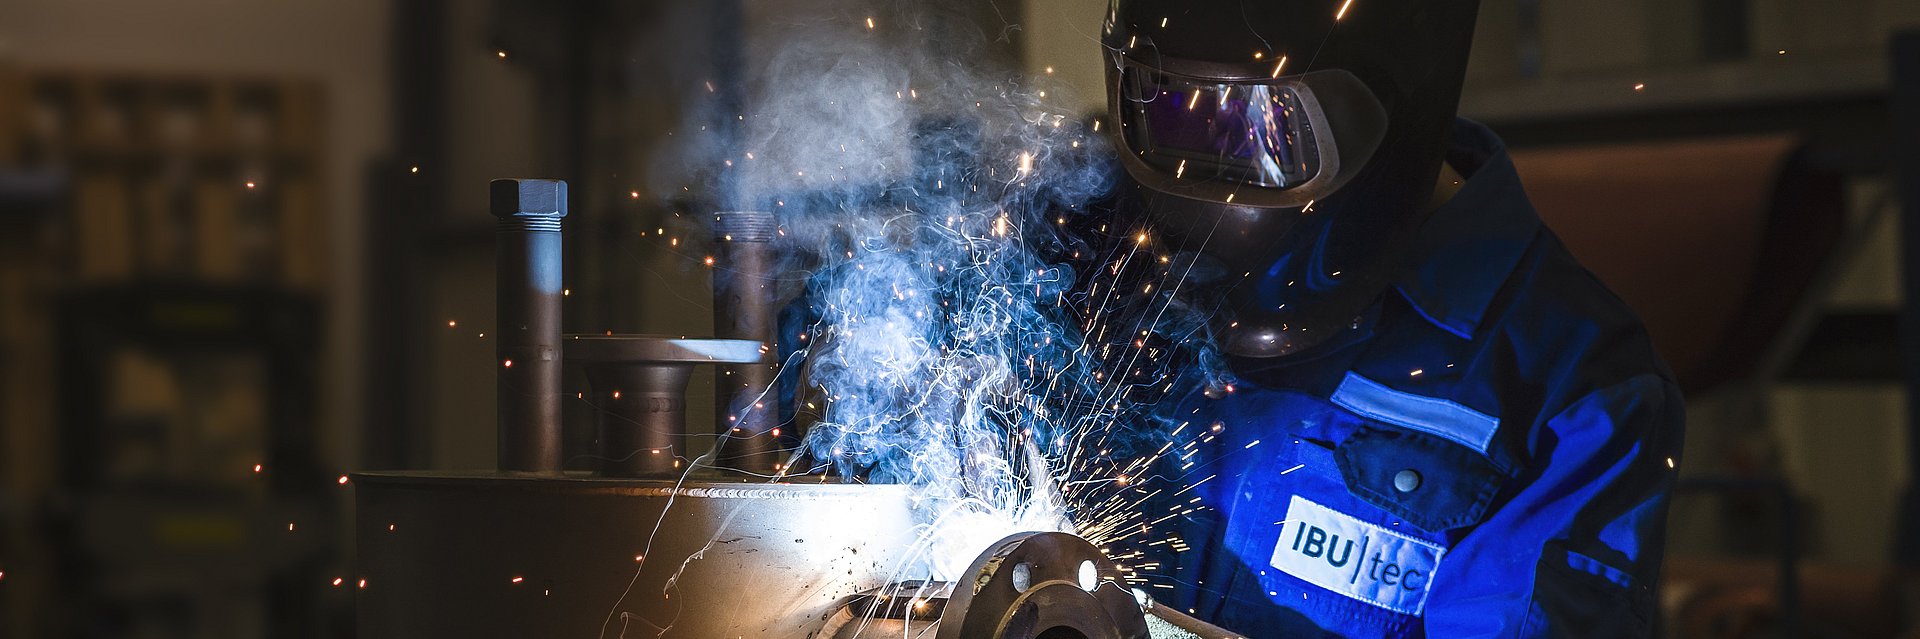 Worker of IBU-tec is welding, picture for professional training at IBU-tec